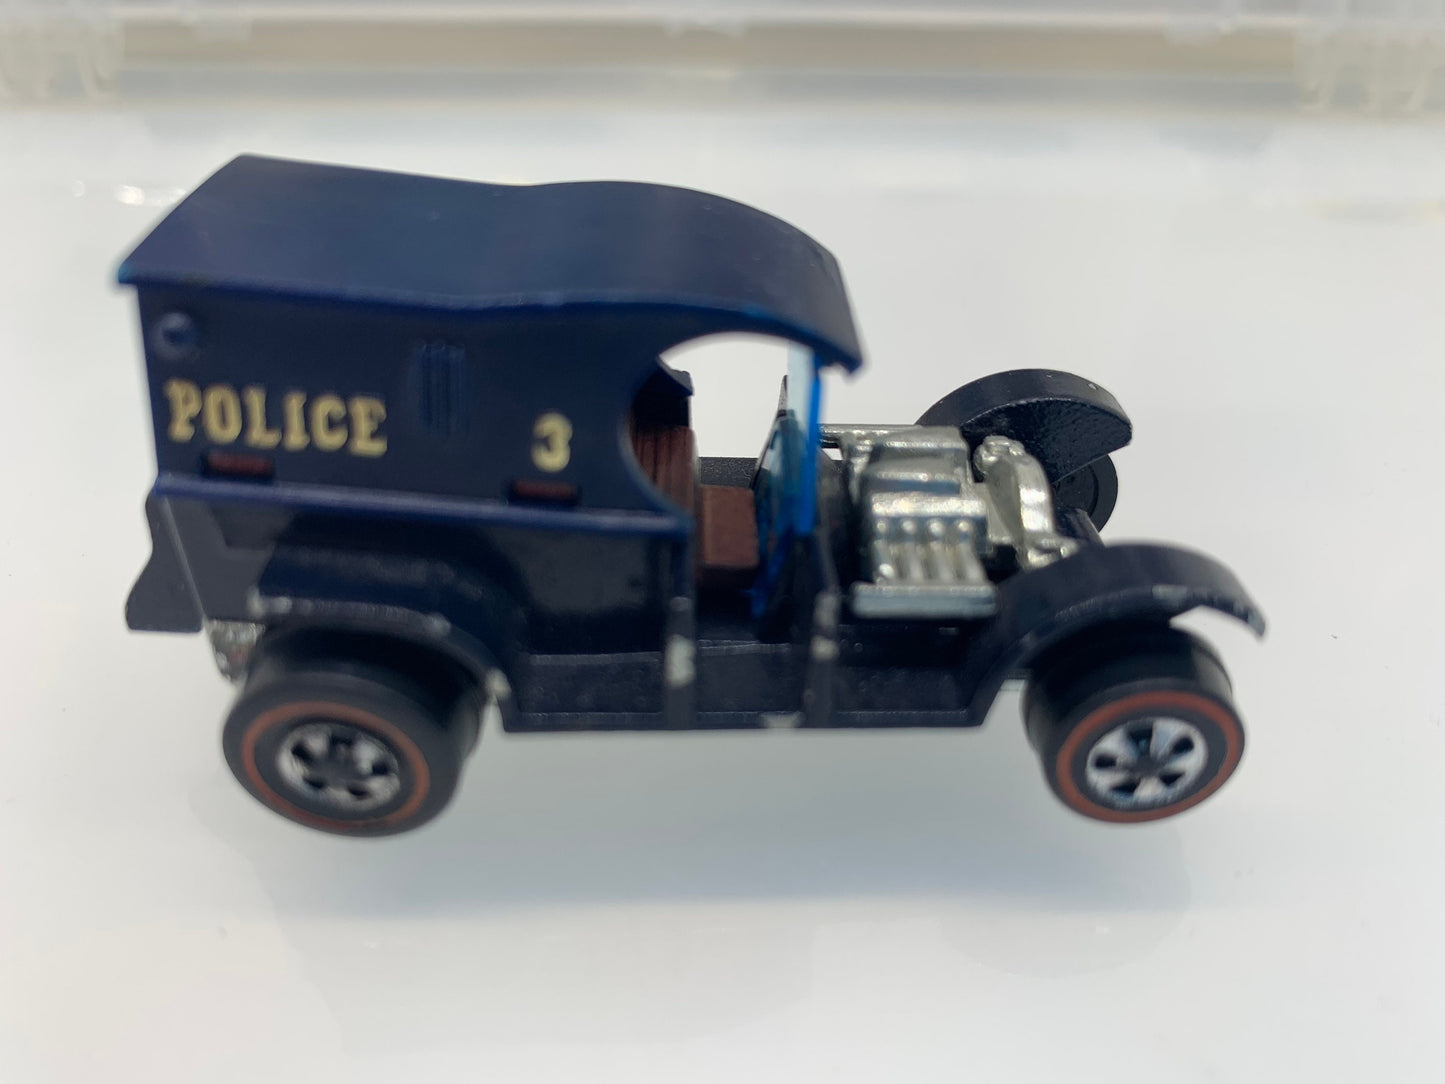 Hot Wheels Police Paddy Wagon Blue Redline 1970 Edition Perfect Birthday Gift Miniature Collectable Model Toy Car